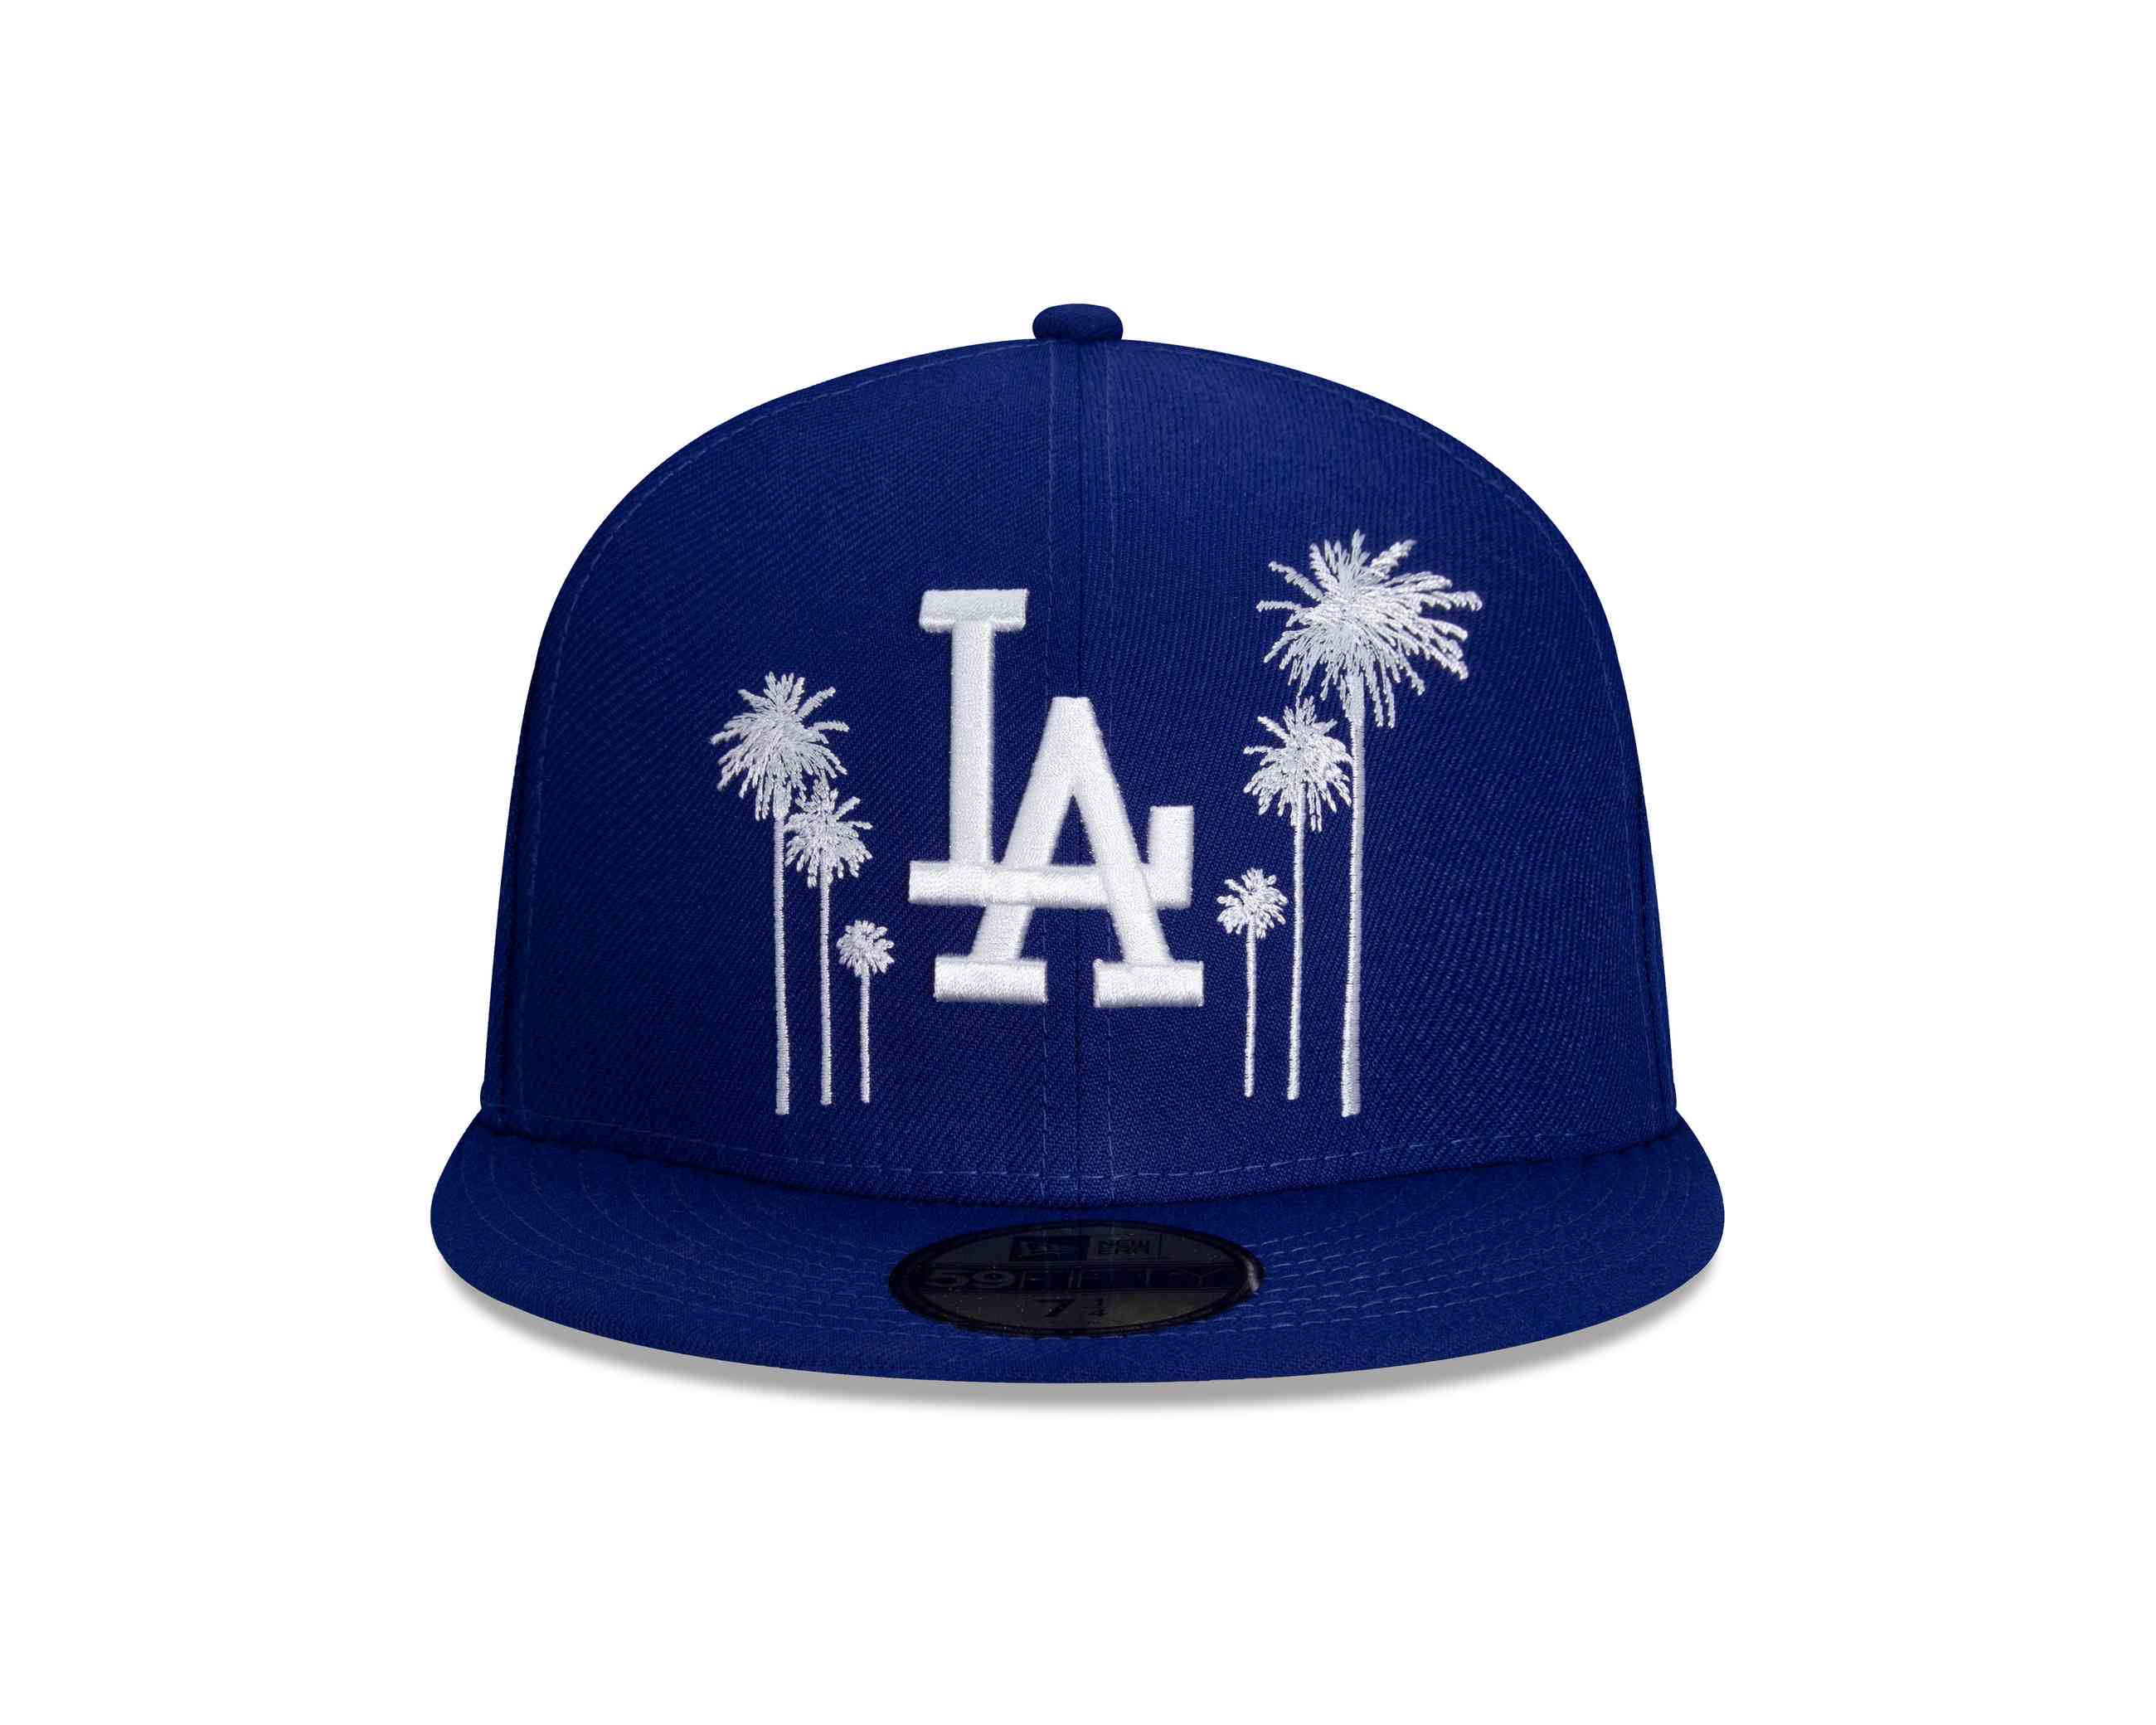 New Era - MLB Los Angeles Dodgers All Star Game Palm 59Fifty Fitted Cap